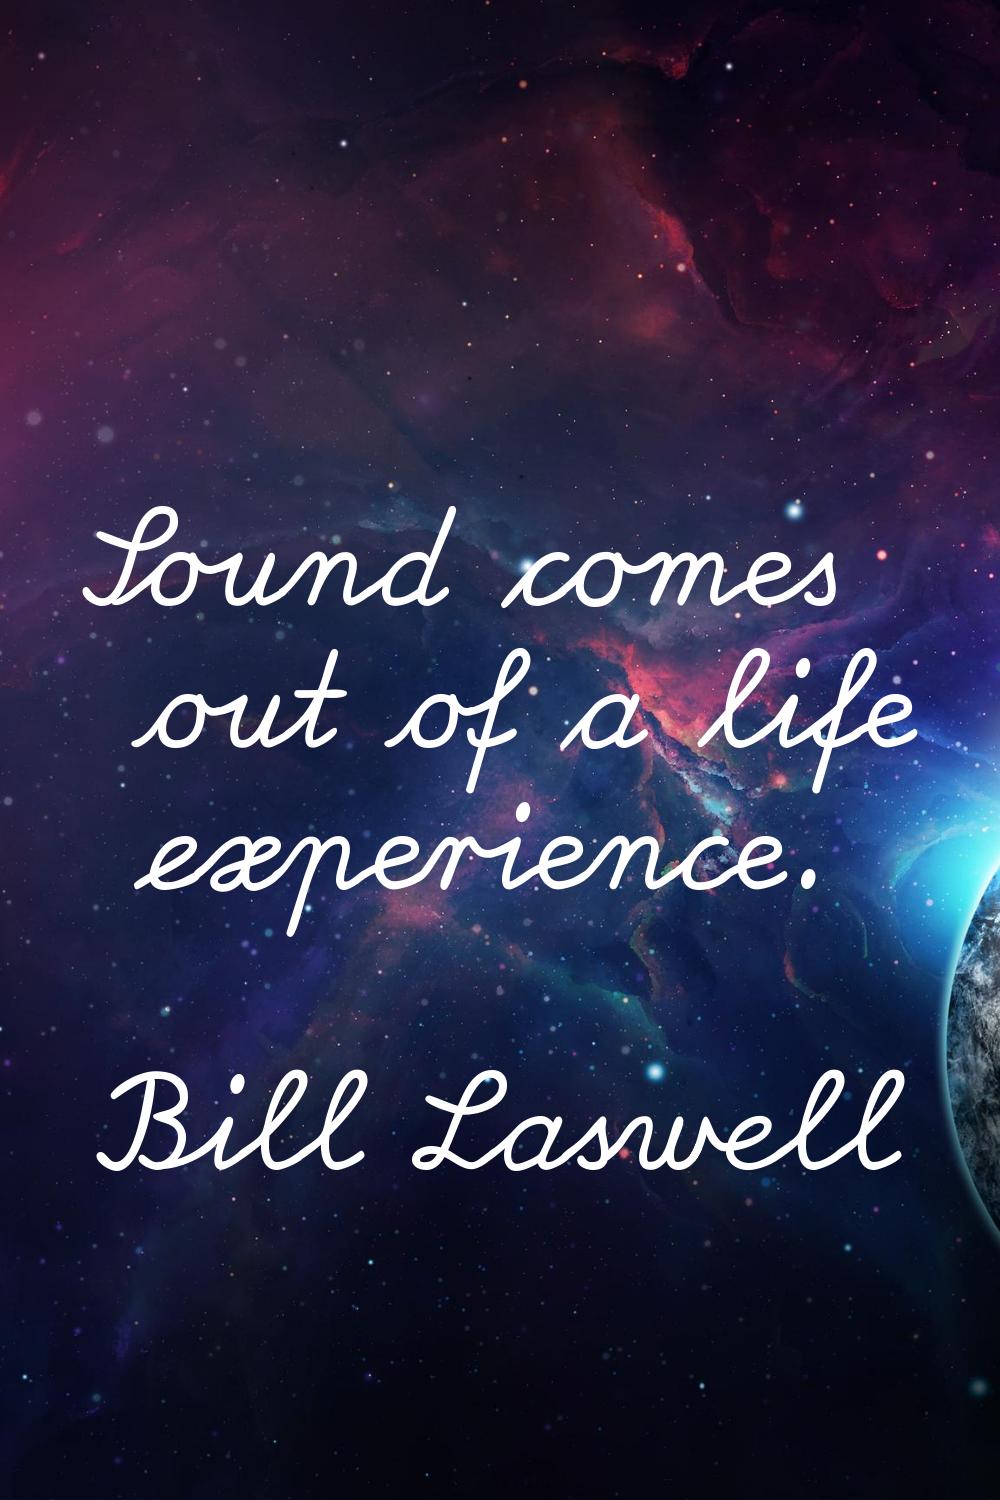 Sound comes out of a life experience.